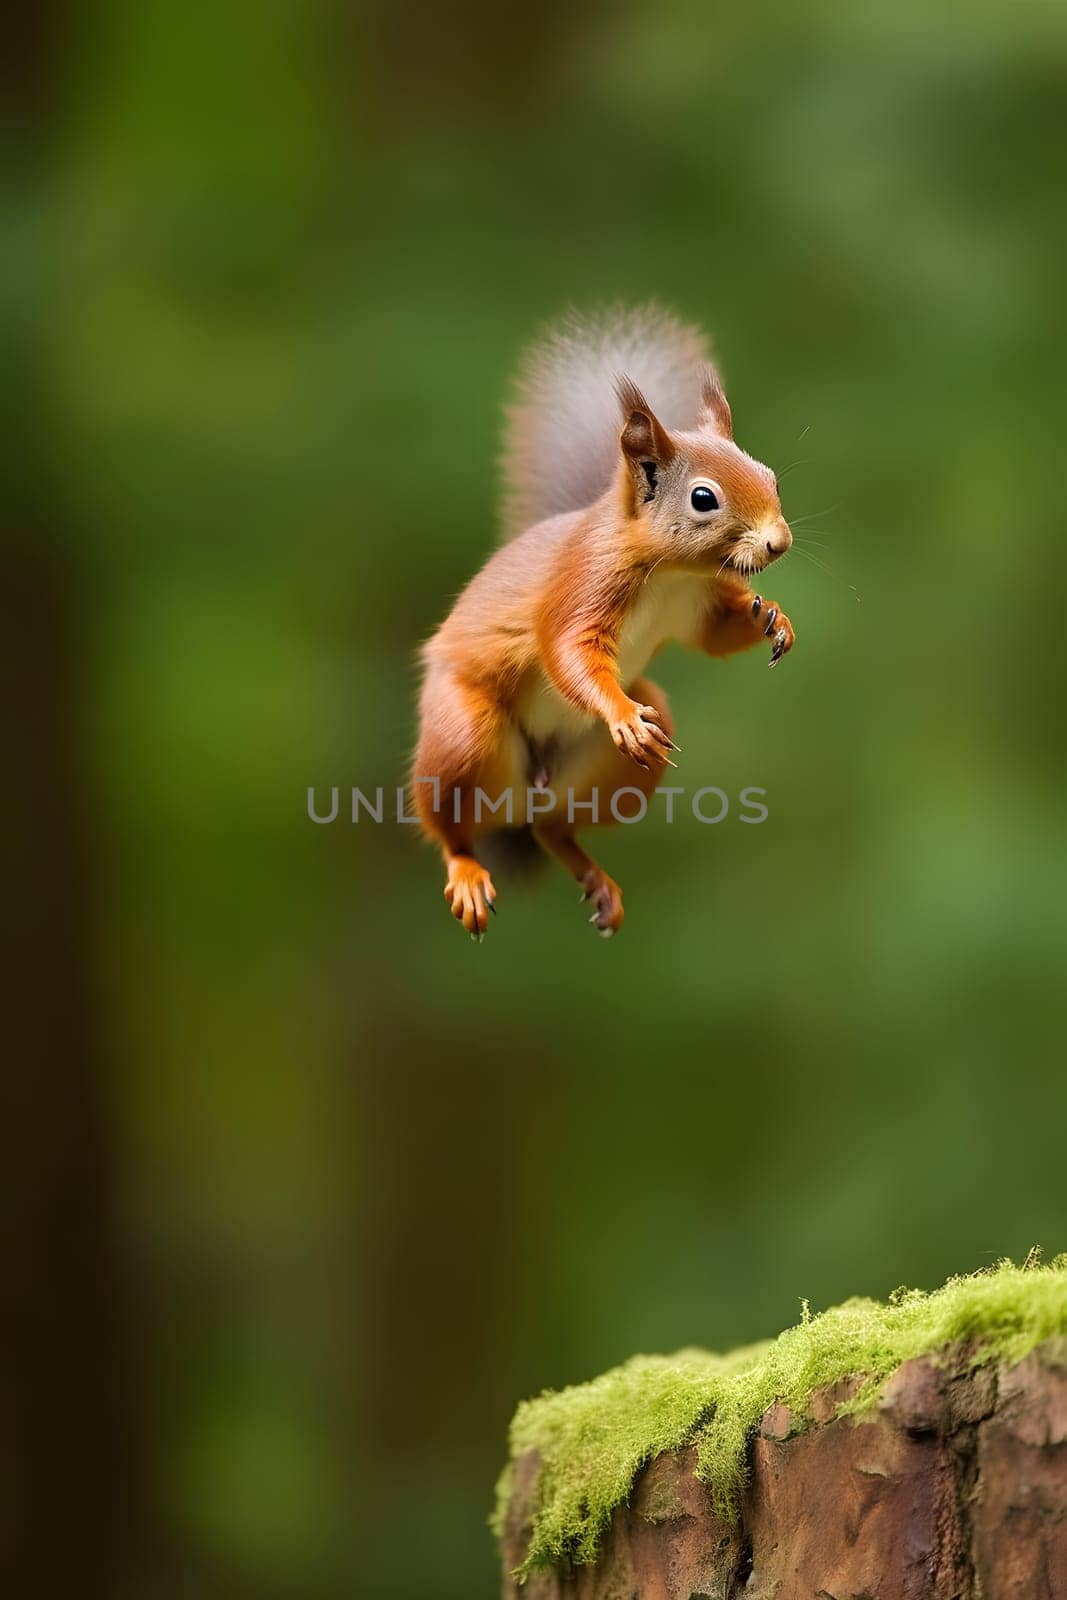 Eurasian red squirrel Sciurus vulgaris jumping in the forest at summer day, neural network generated photorealistic image by z1b